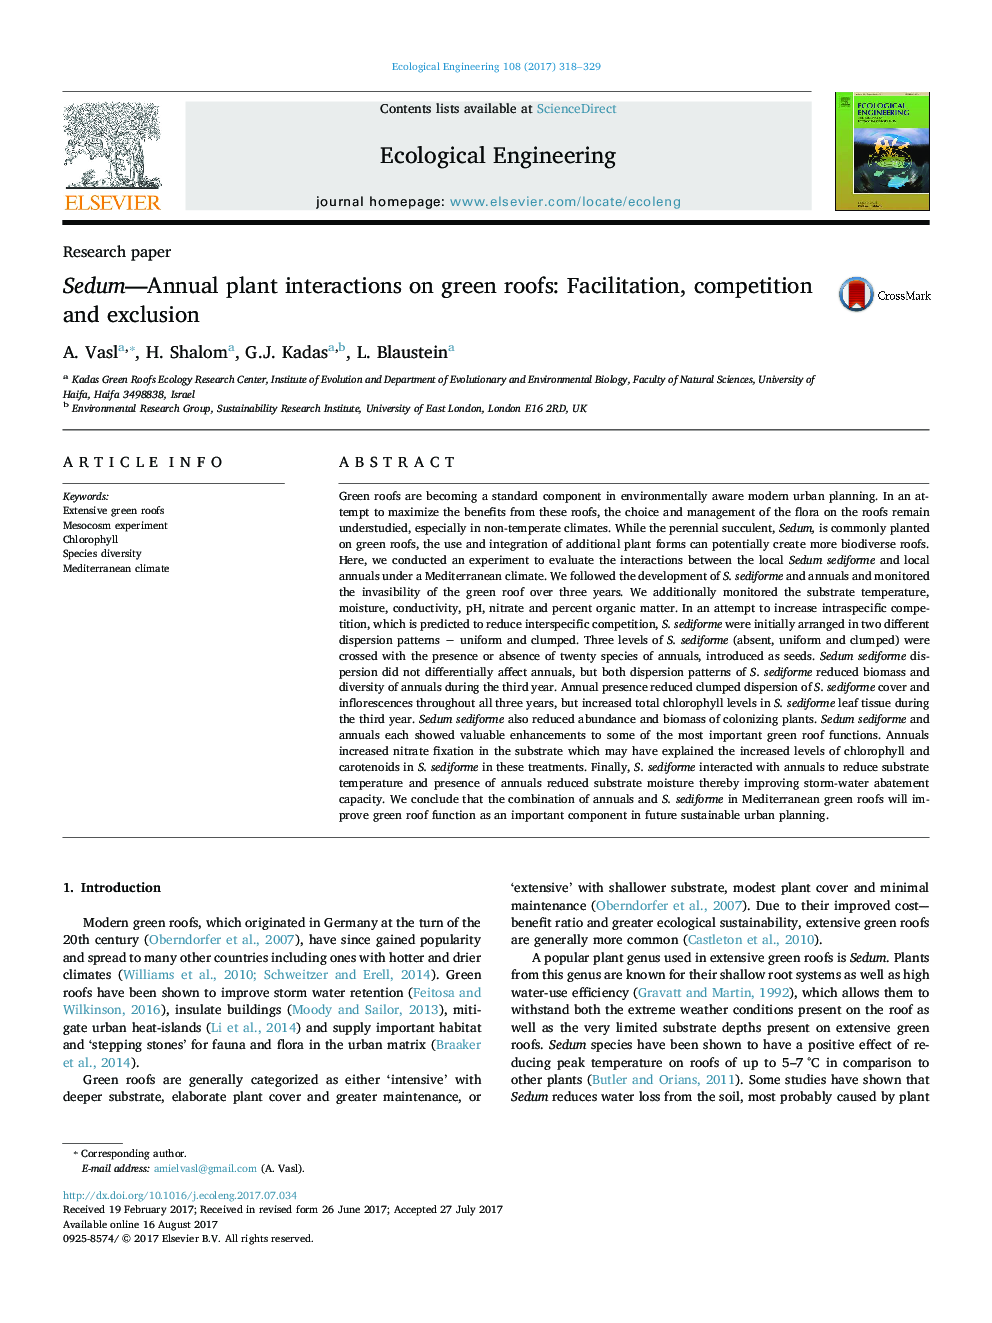 Research paperSedum-Annual plant interactions on green roofs: Facilitation, competition and exclusion